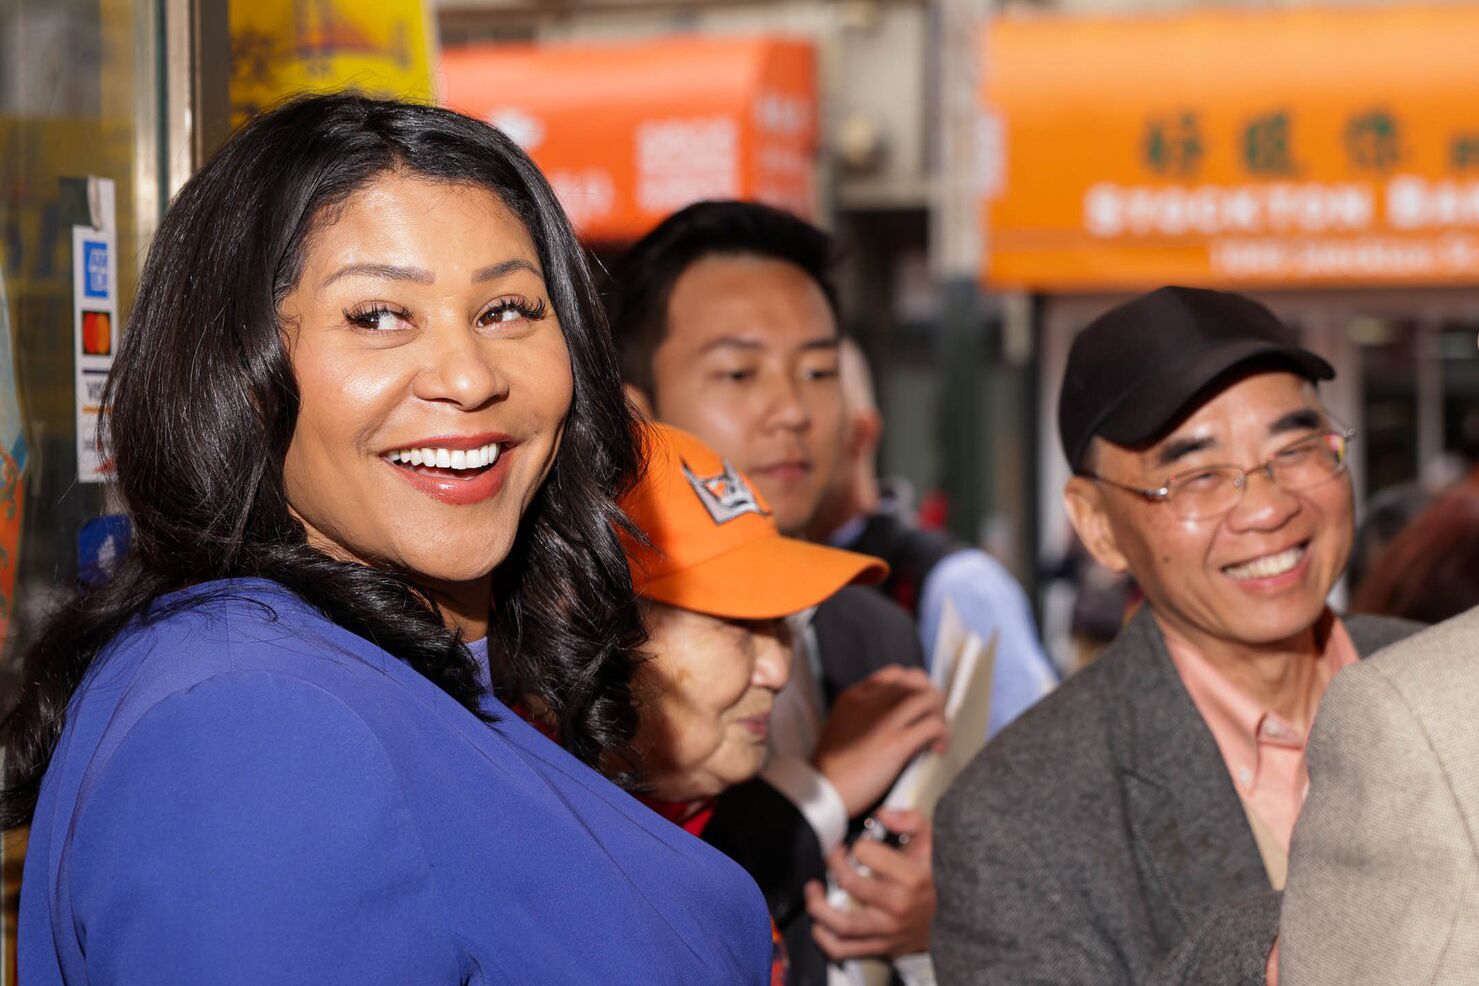 A smiling woman in a blue top is at the forefront with cheerful people in the background under orange signs with Asian characters.